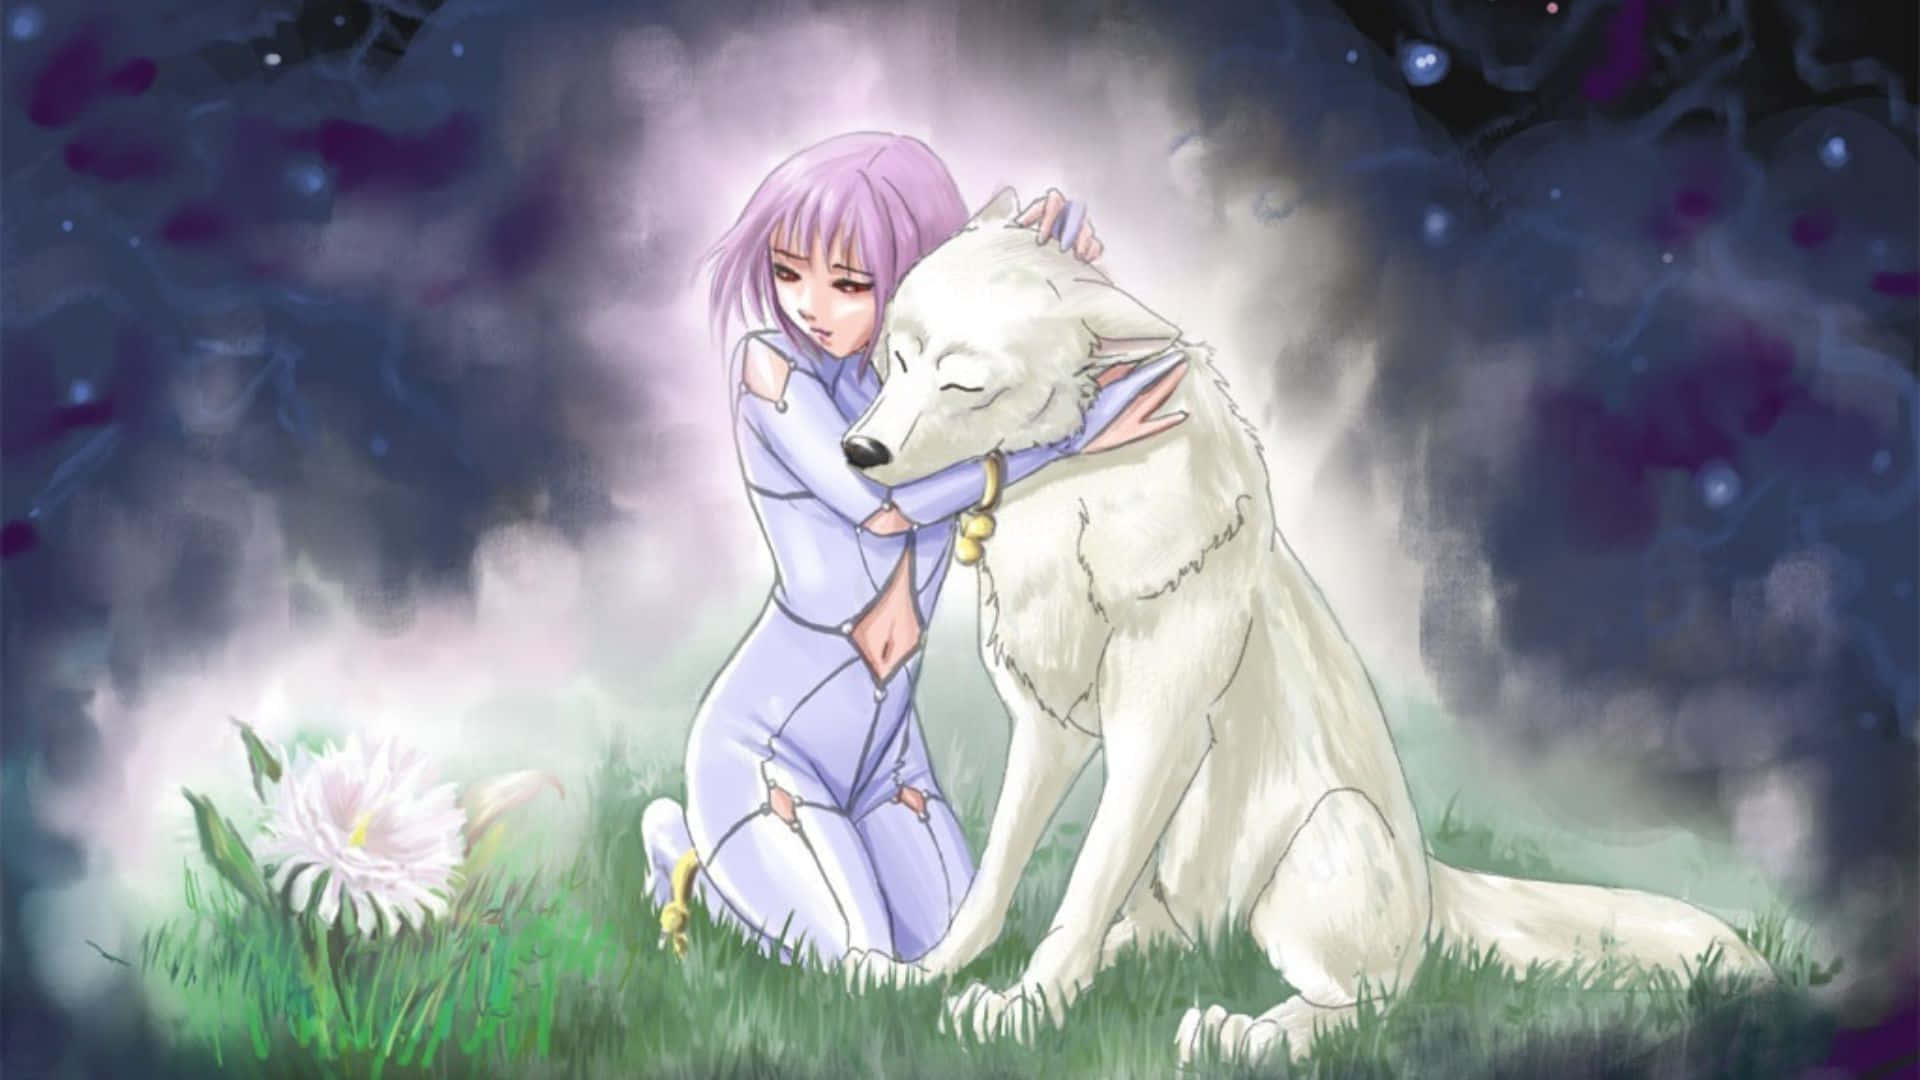 Cheza, The Flower Maiden, surrounded by wolves in Wolf's Rain Wallpaper